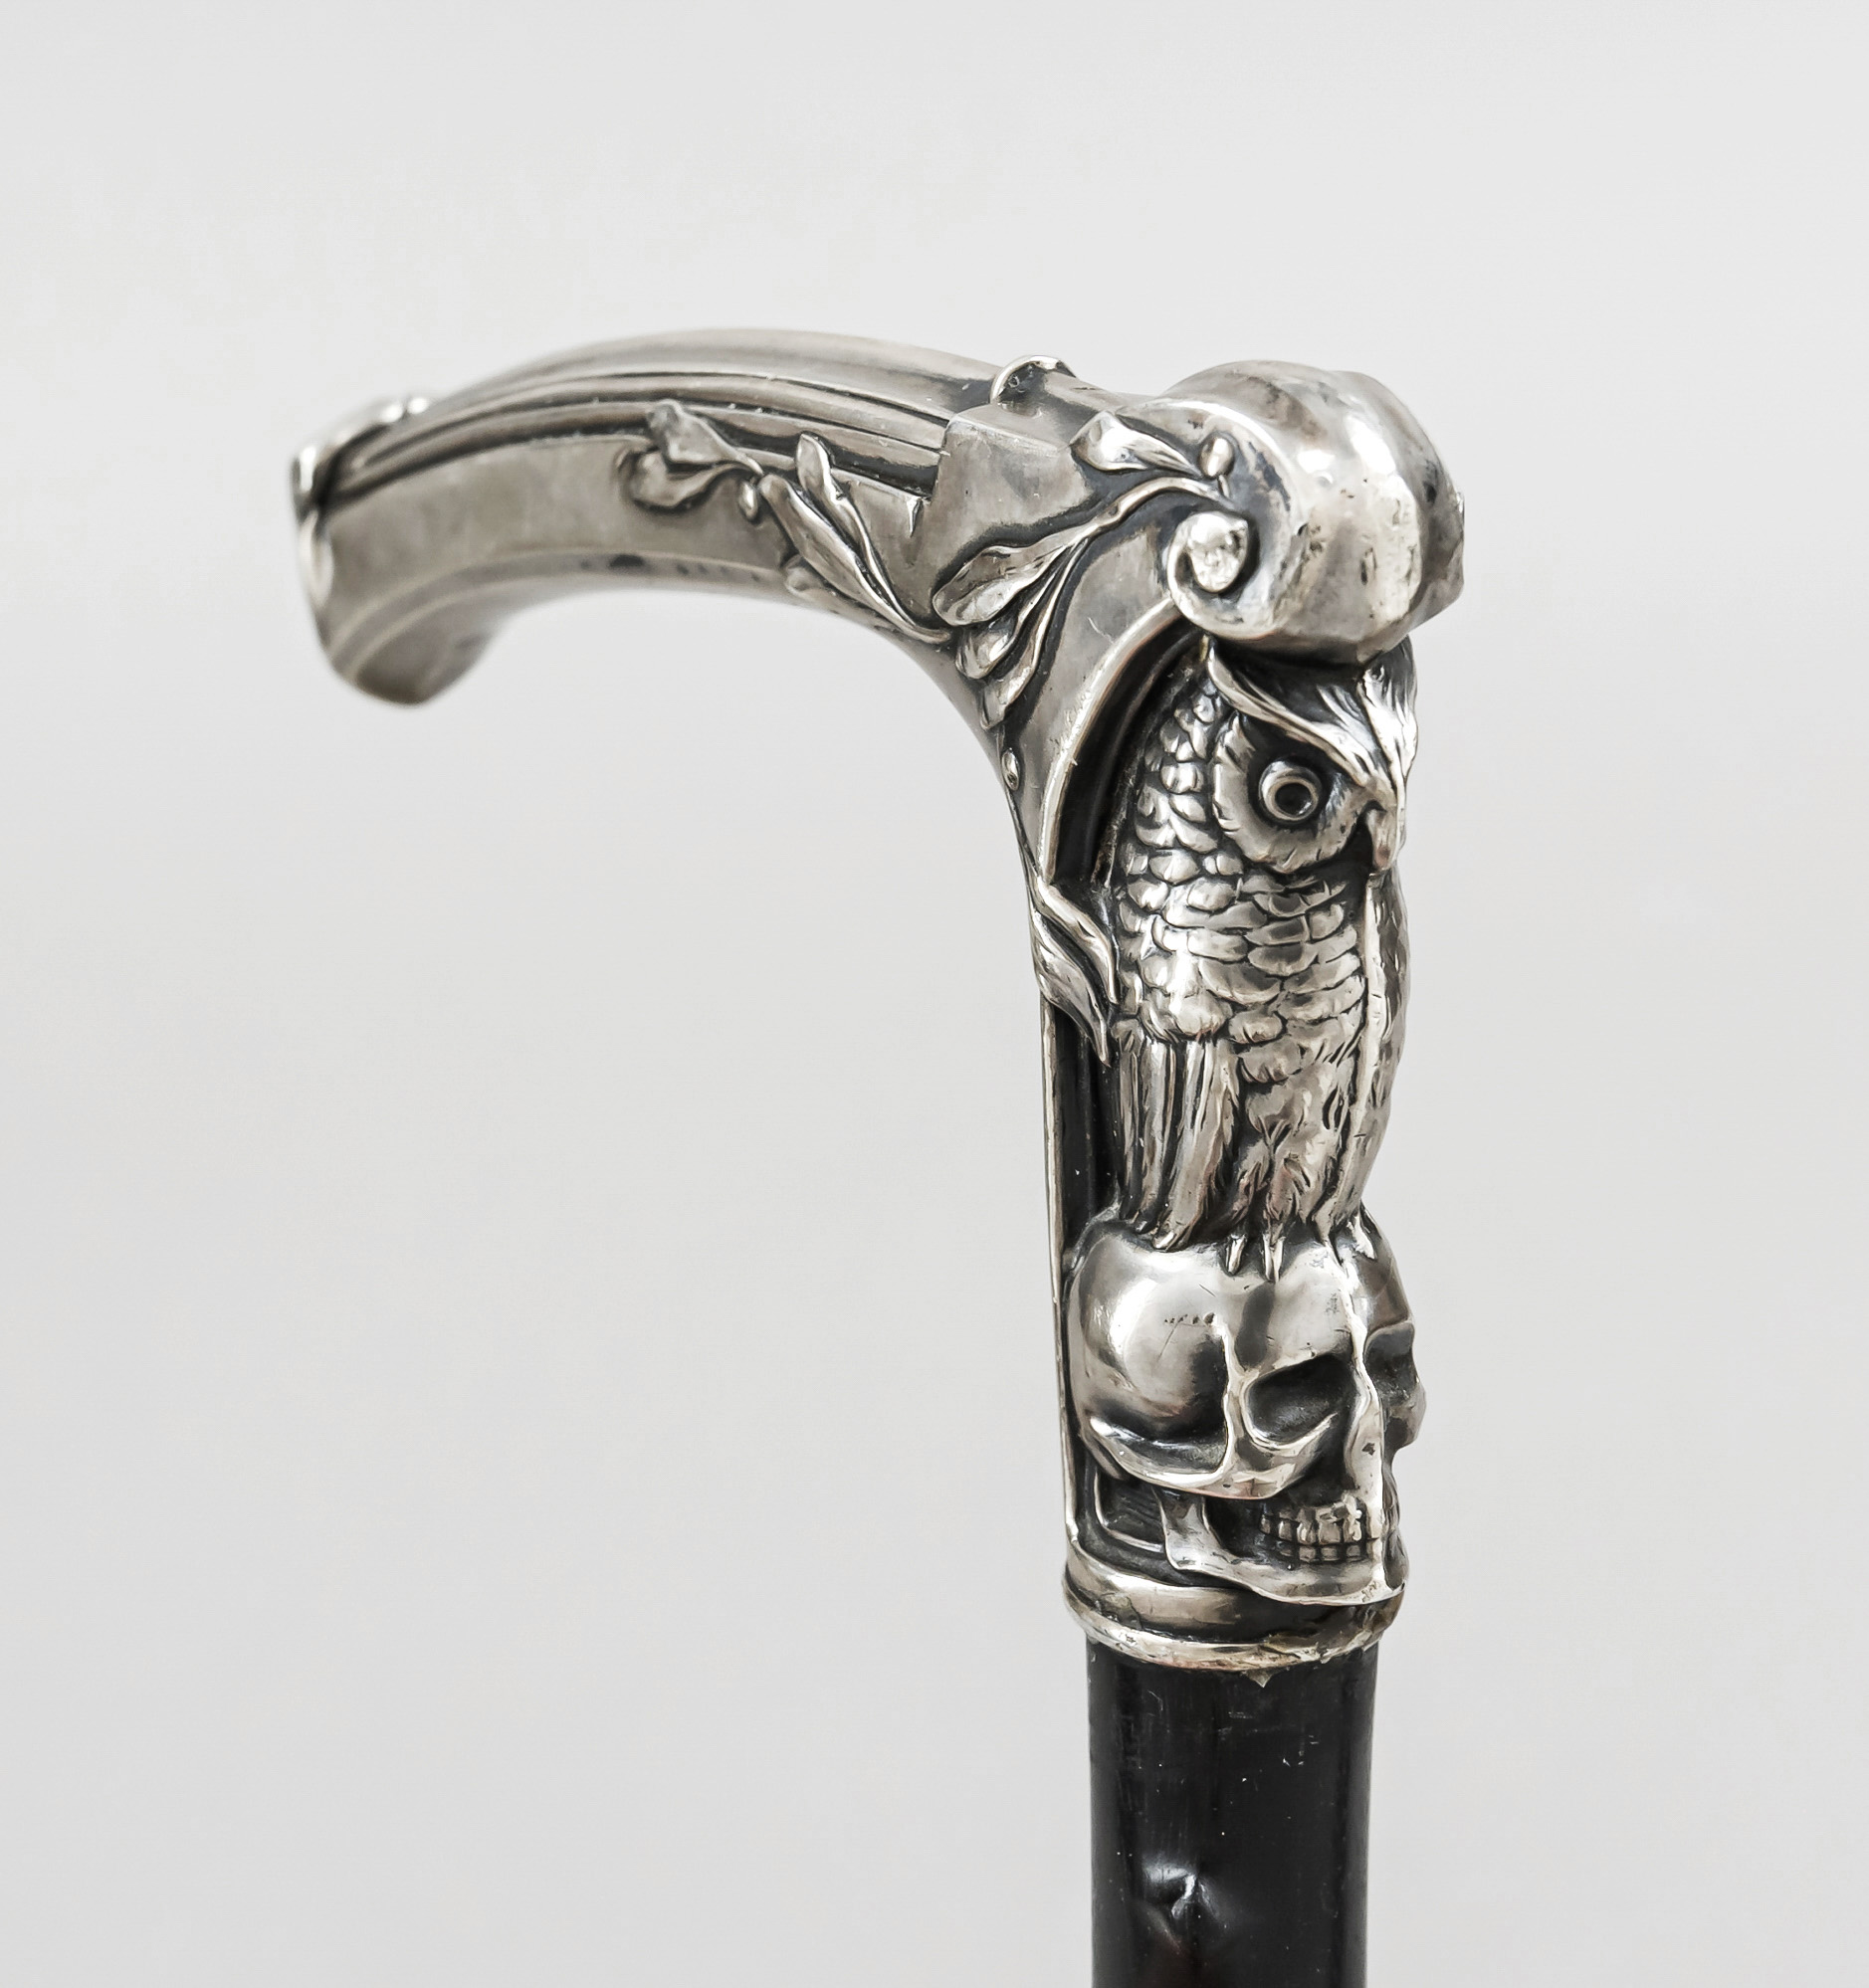 Walking stick with silver handle, probably German, c. 1900, silver 800/000, decorated with owl, - Image 2 of 3